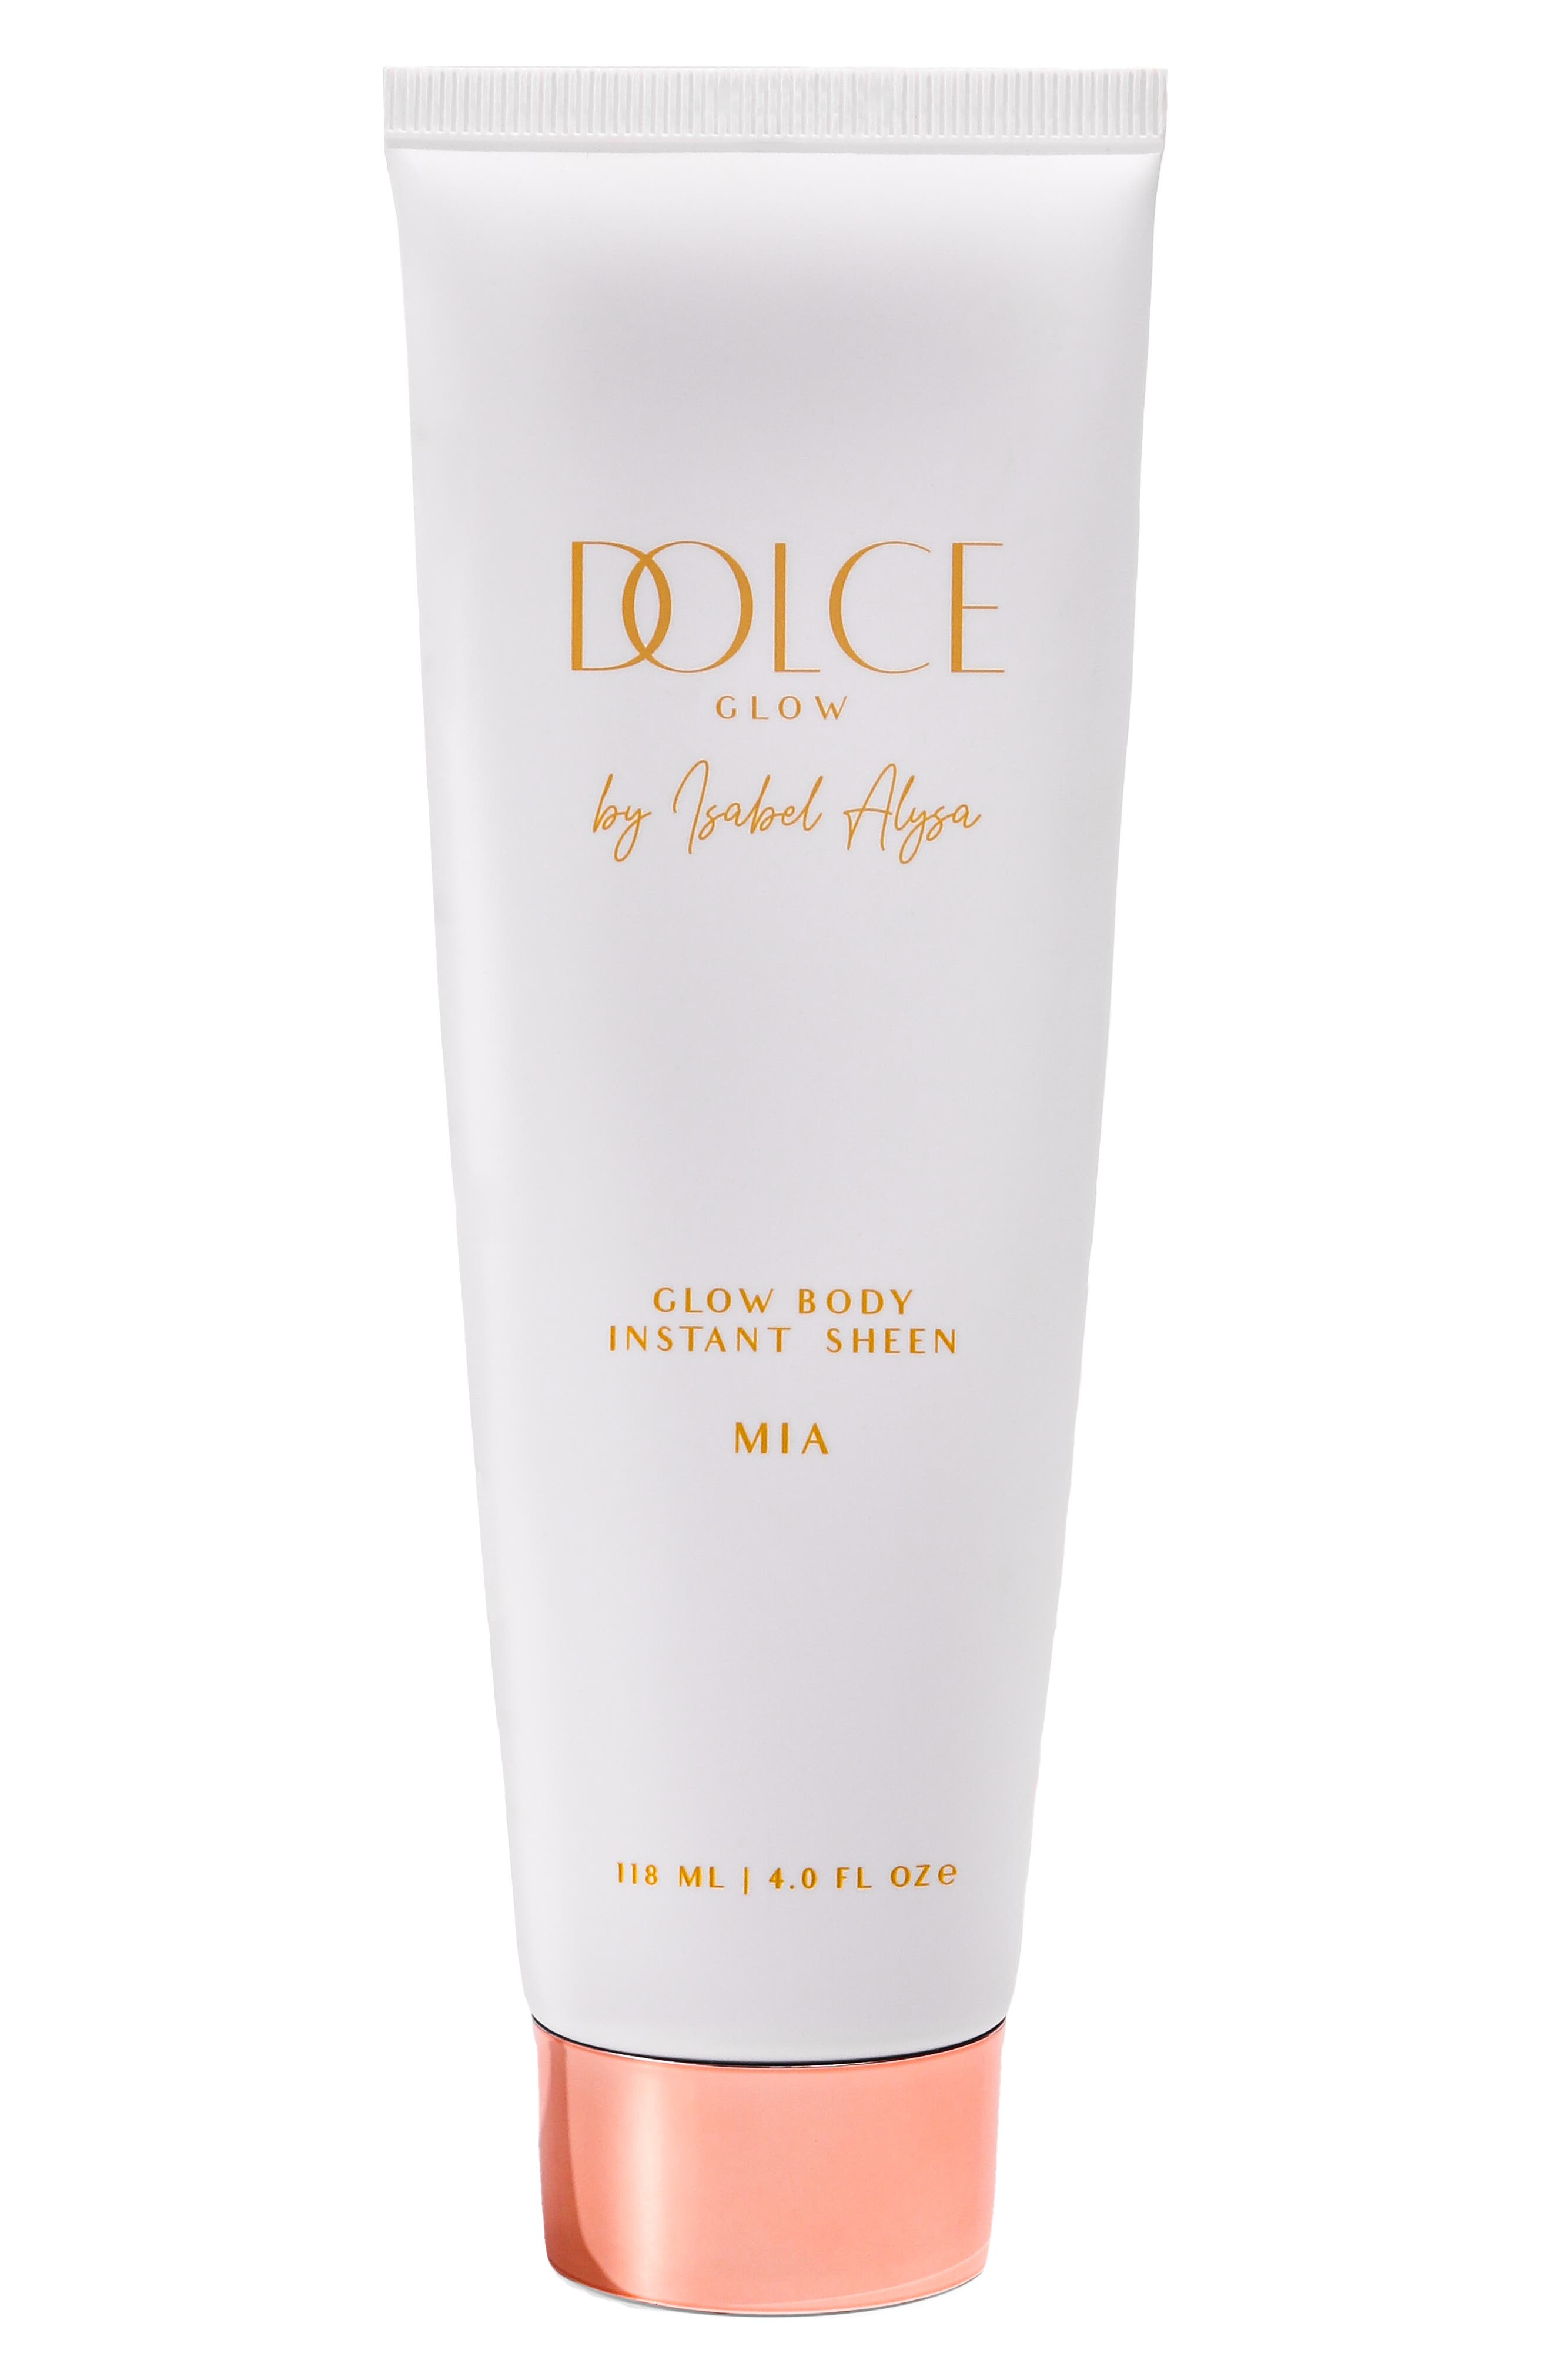 Dolce Glow by Isabel Alysa Mia Shimmer Topper Lotion in None at Nordstrom